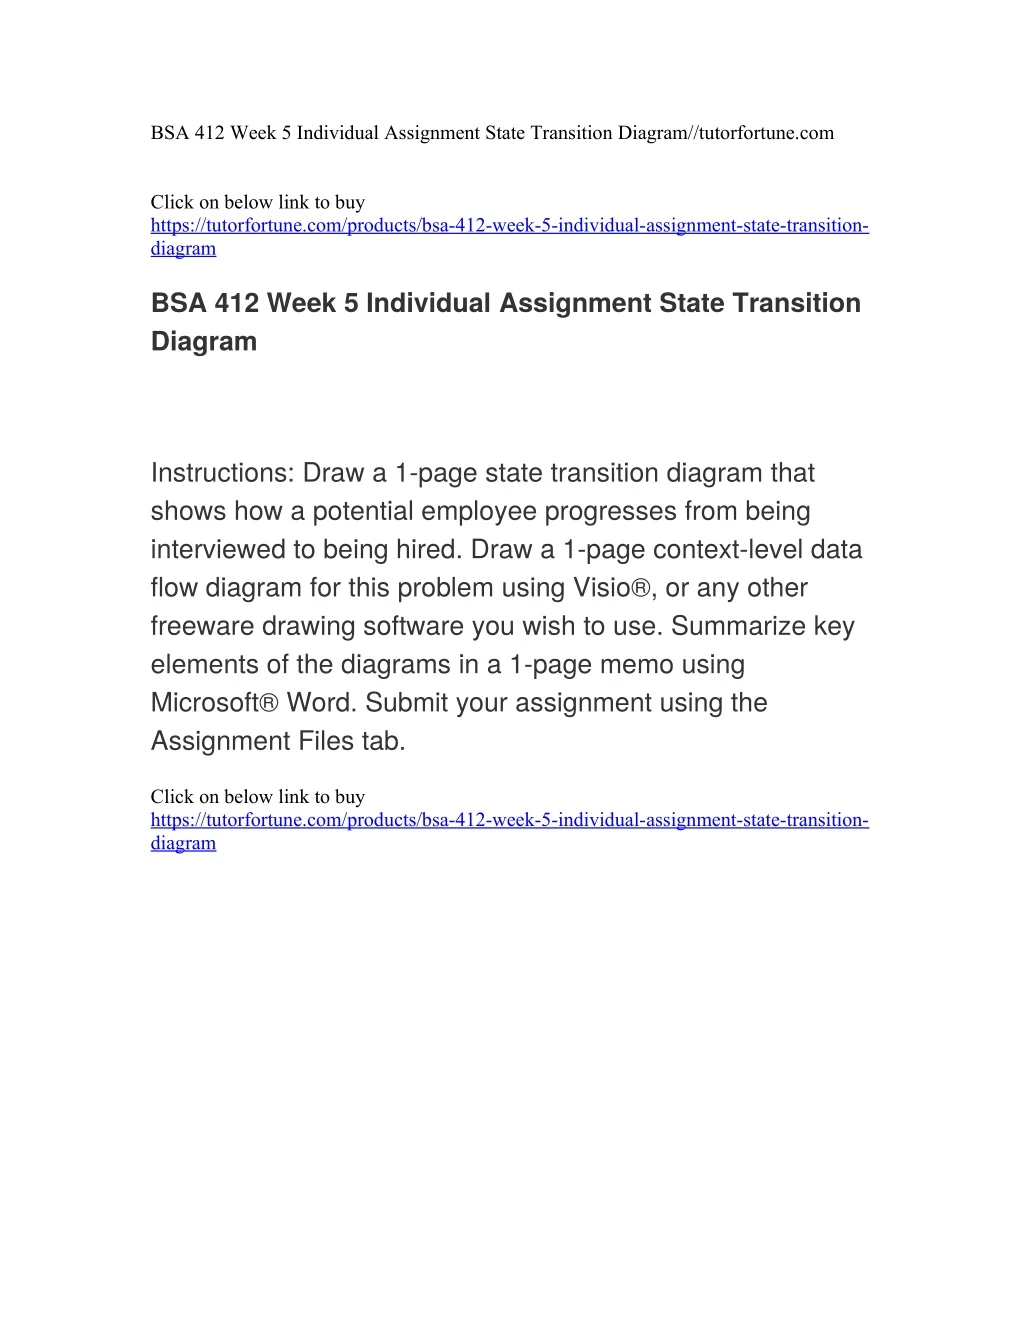 bsa 412 week 5 individual assignment state